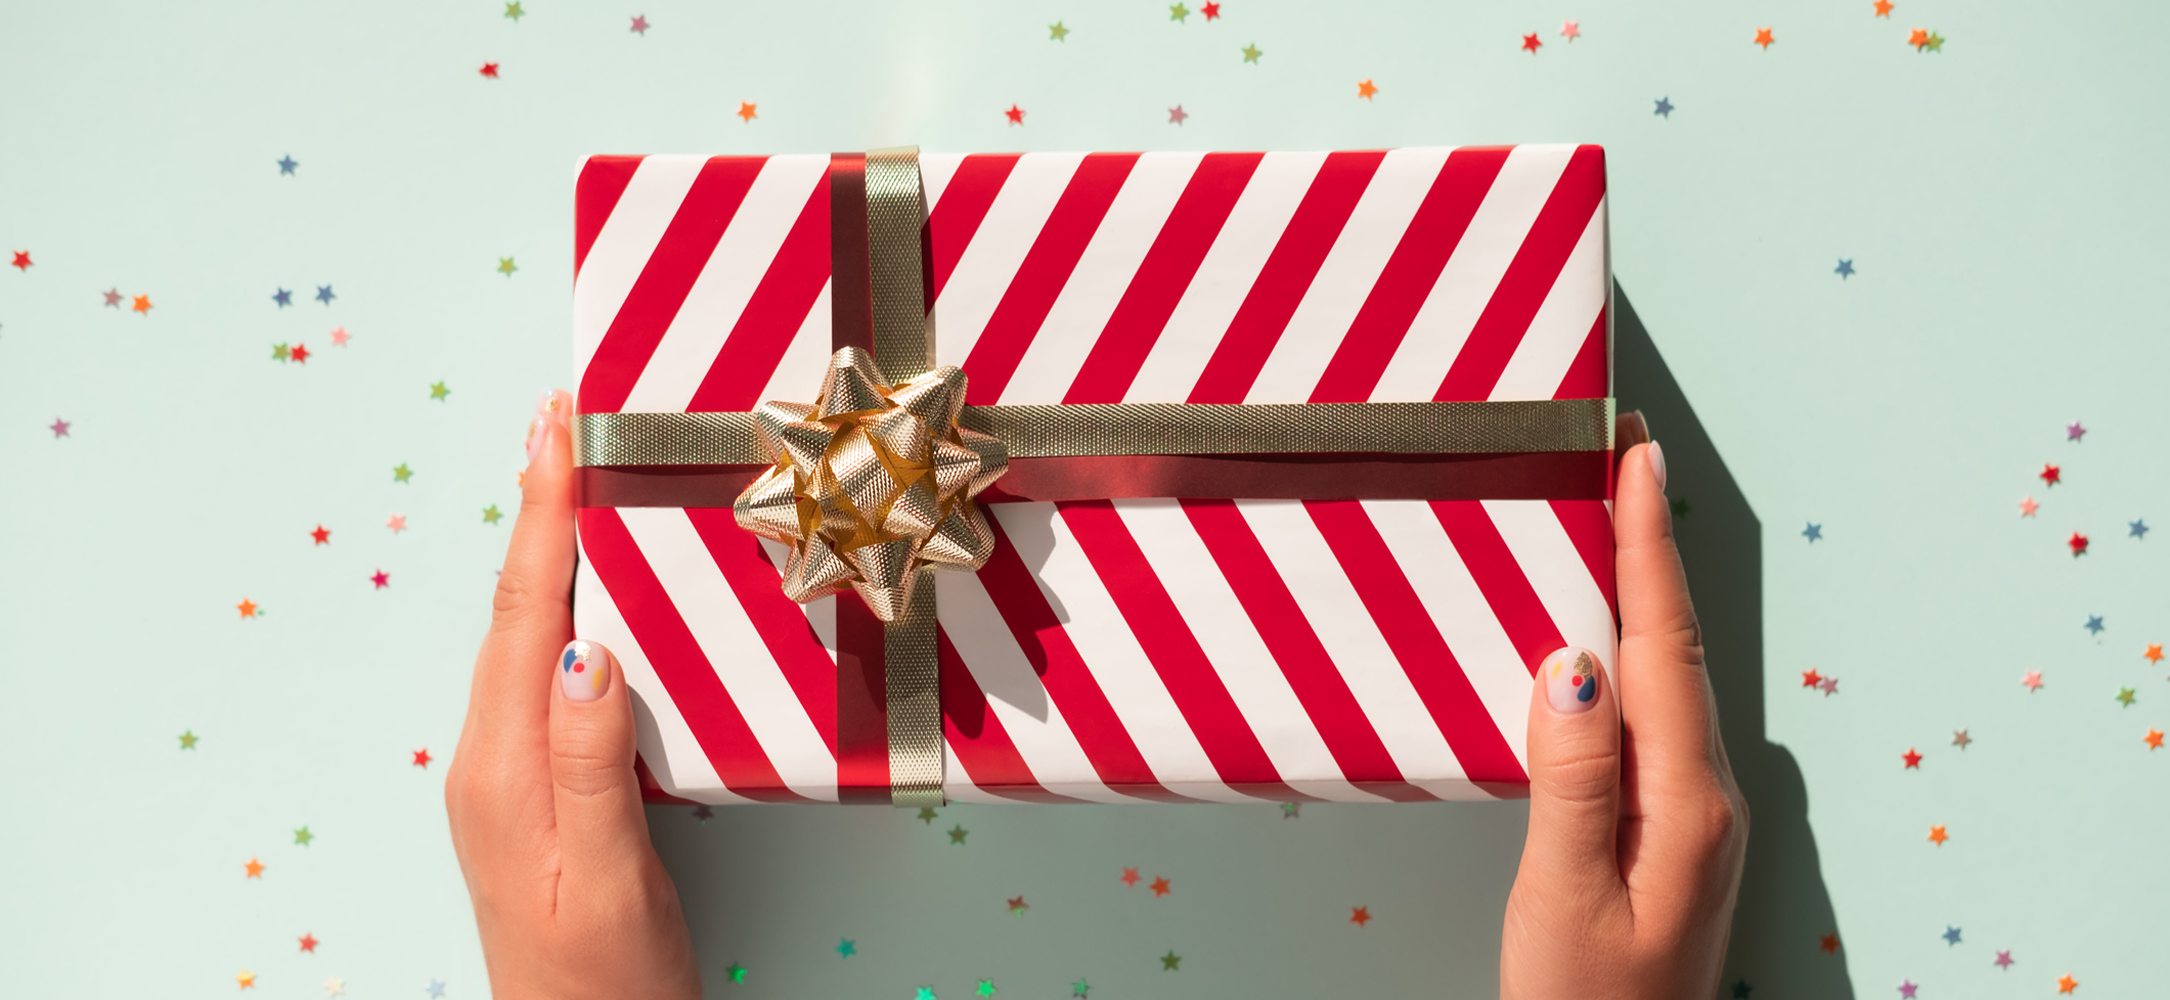 Two hands holding a rectangular holiday gift wrapped in red and white striped wrapping paper and a gold bow.